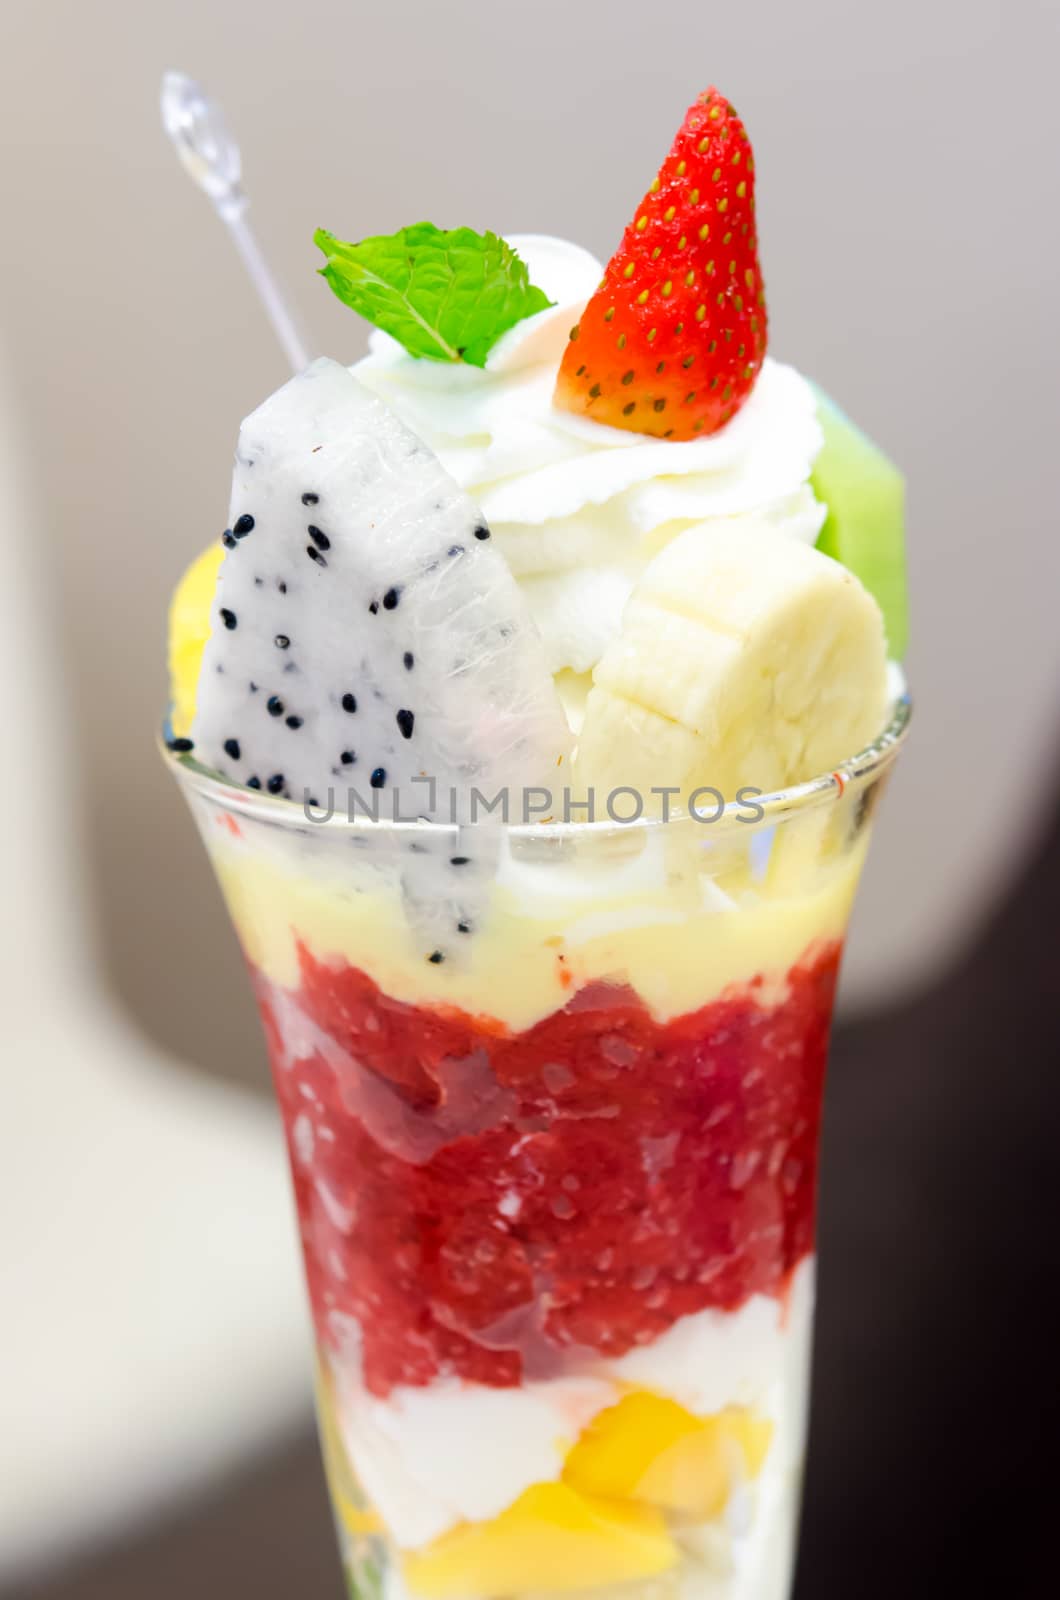 Ice cream and fruit in a cup.